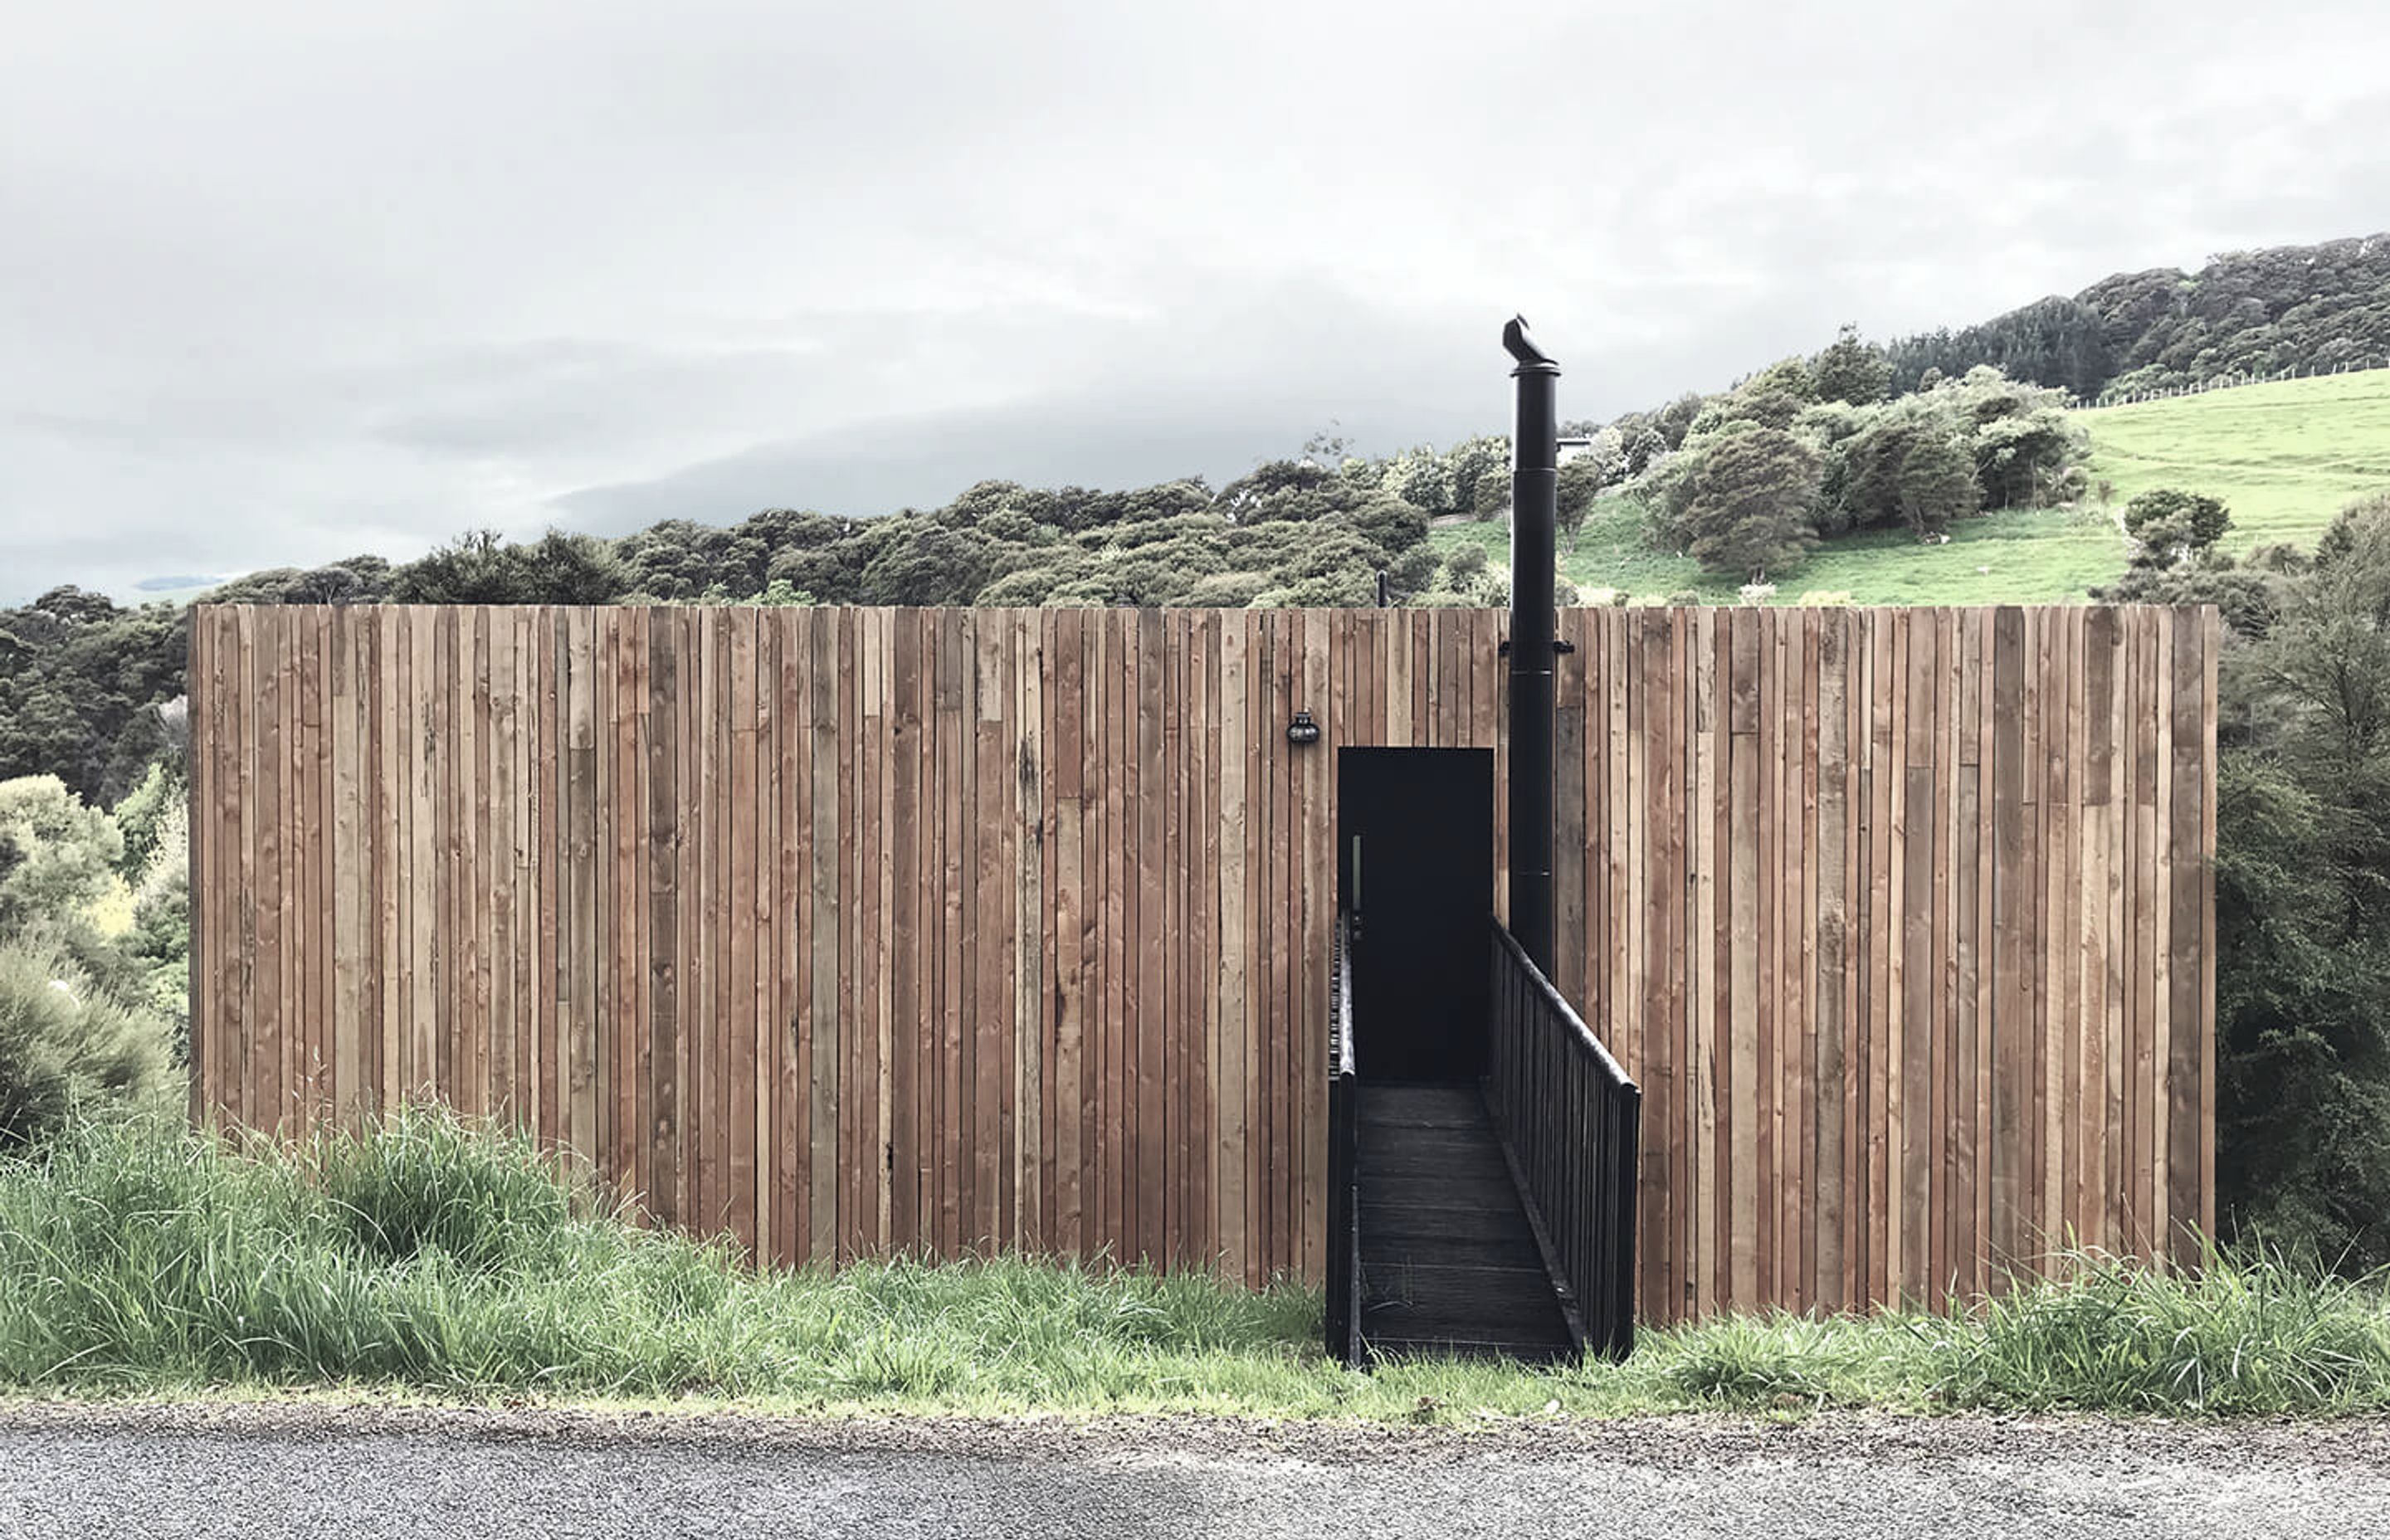 The black entrance forms a void within the timber-clad envelope which wraps around the home and sympathetically sits within the manuka-clad and rural landscape.